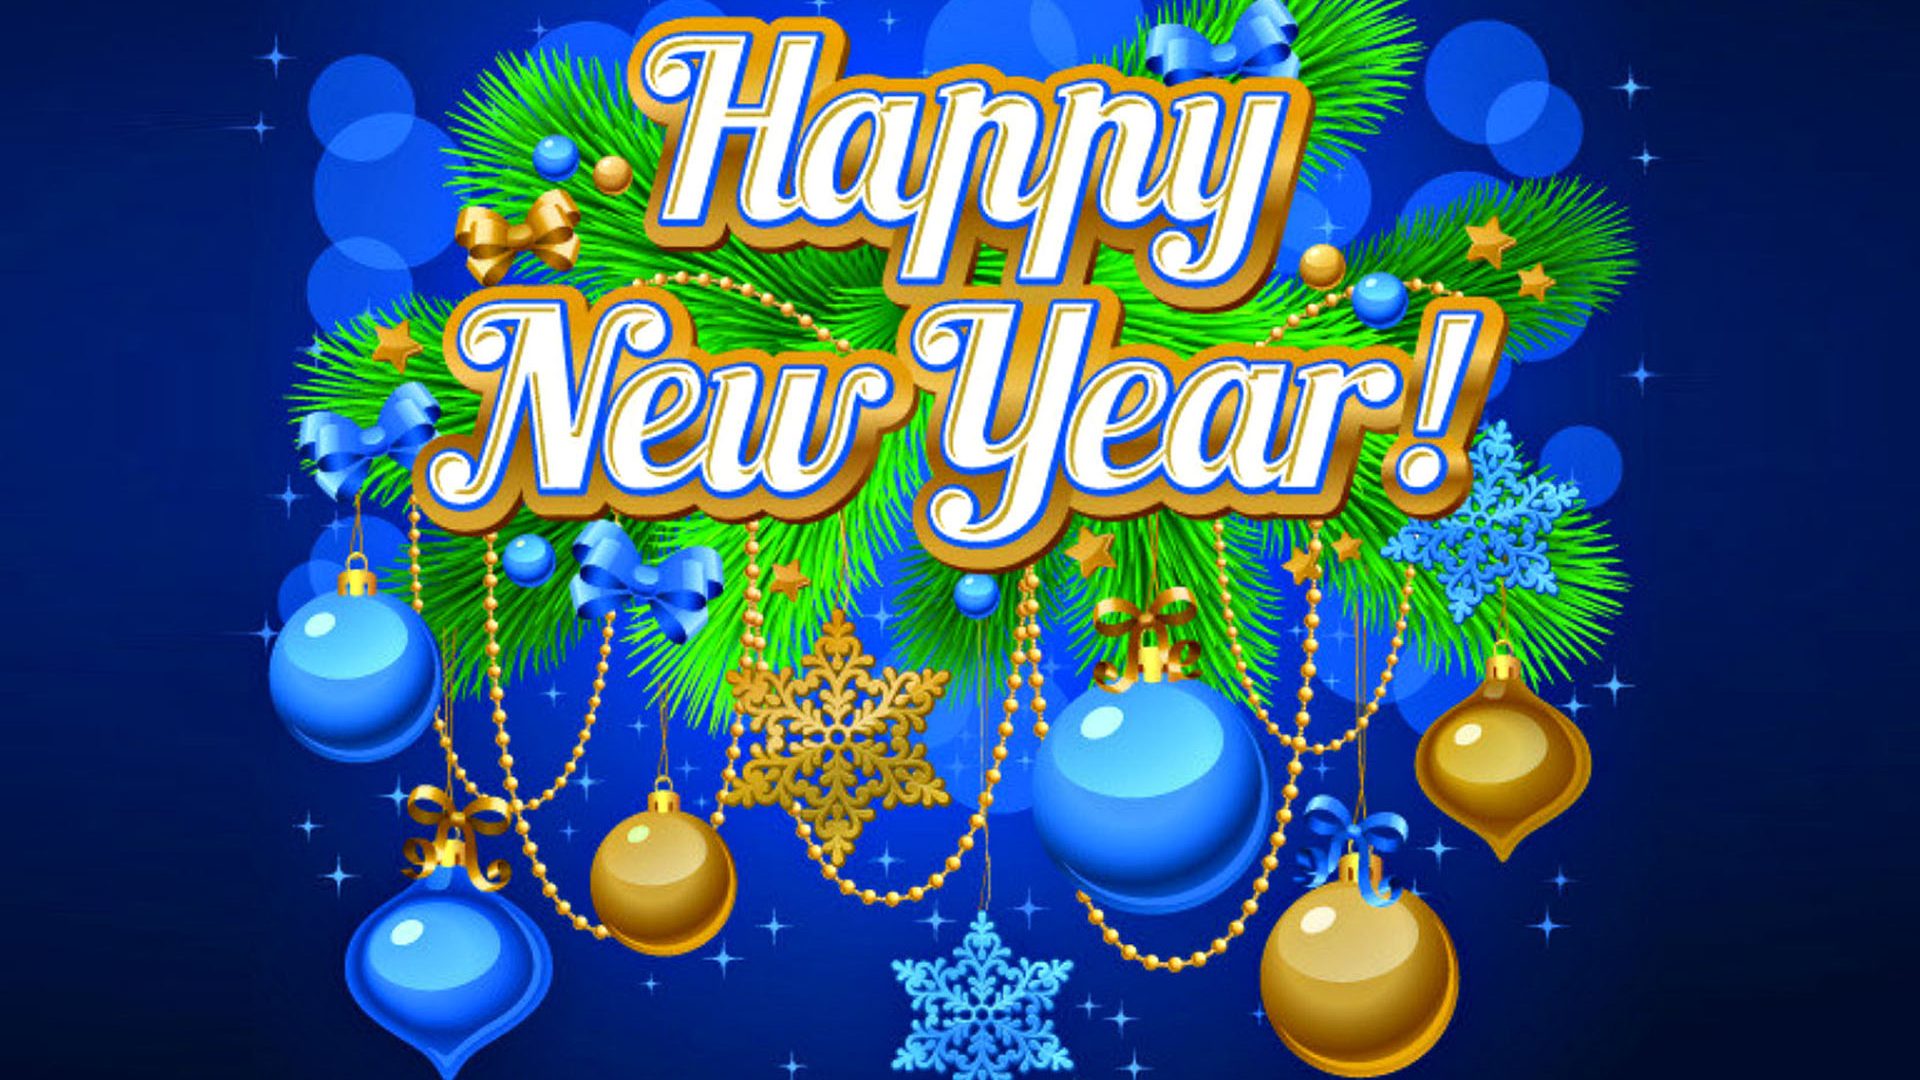 Happy New Year Images Hd